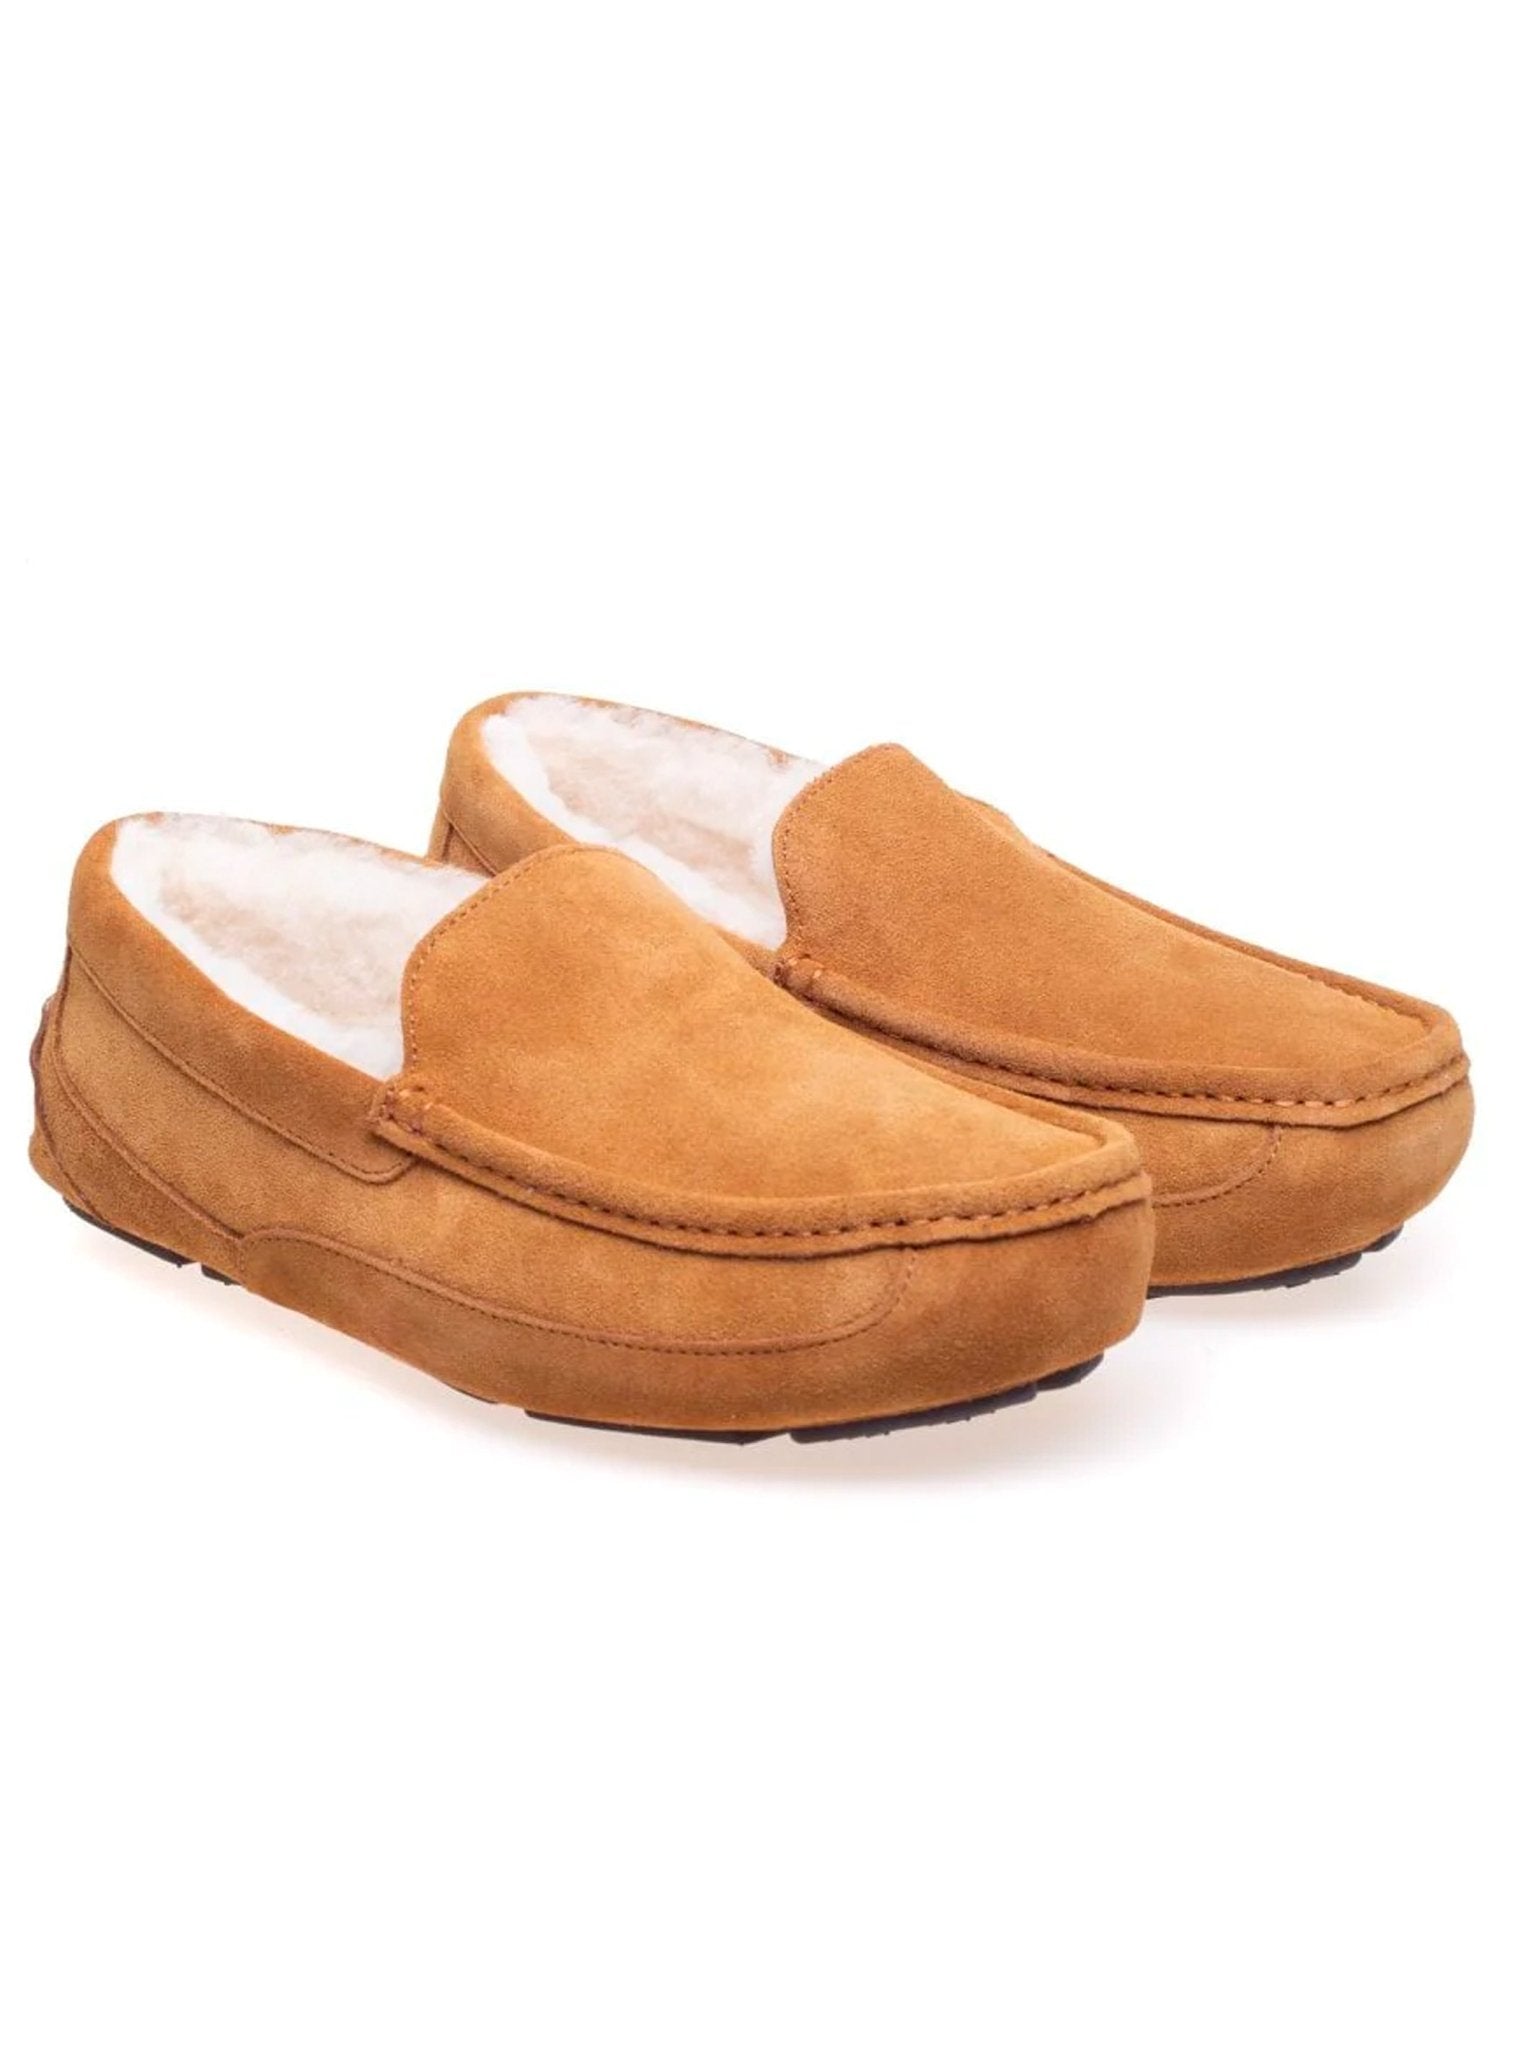 4elementsclothingSteptronicSteptronic - Marlow Leather / Suede Mens Slippers & House shoesShoesMarlow - Ginger - 41